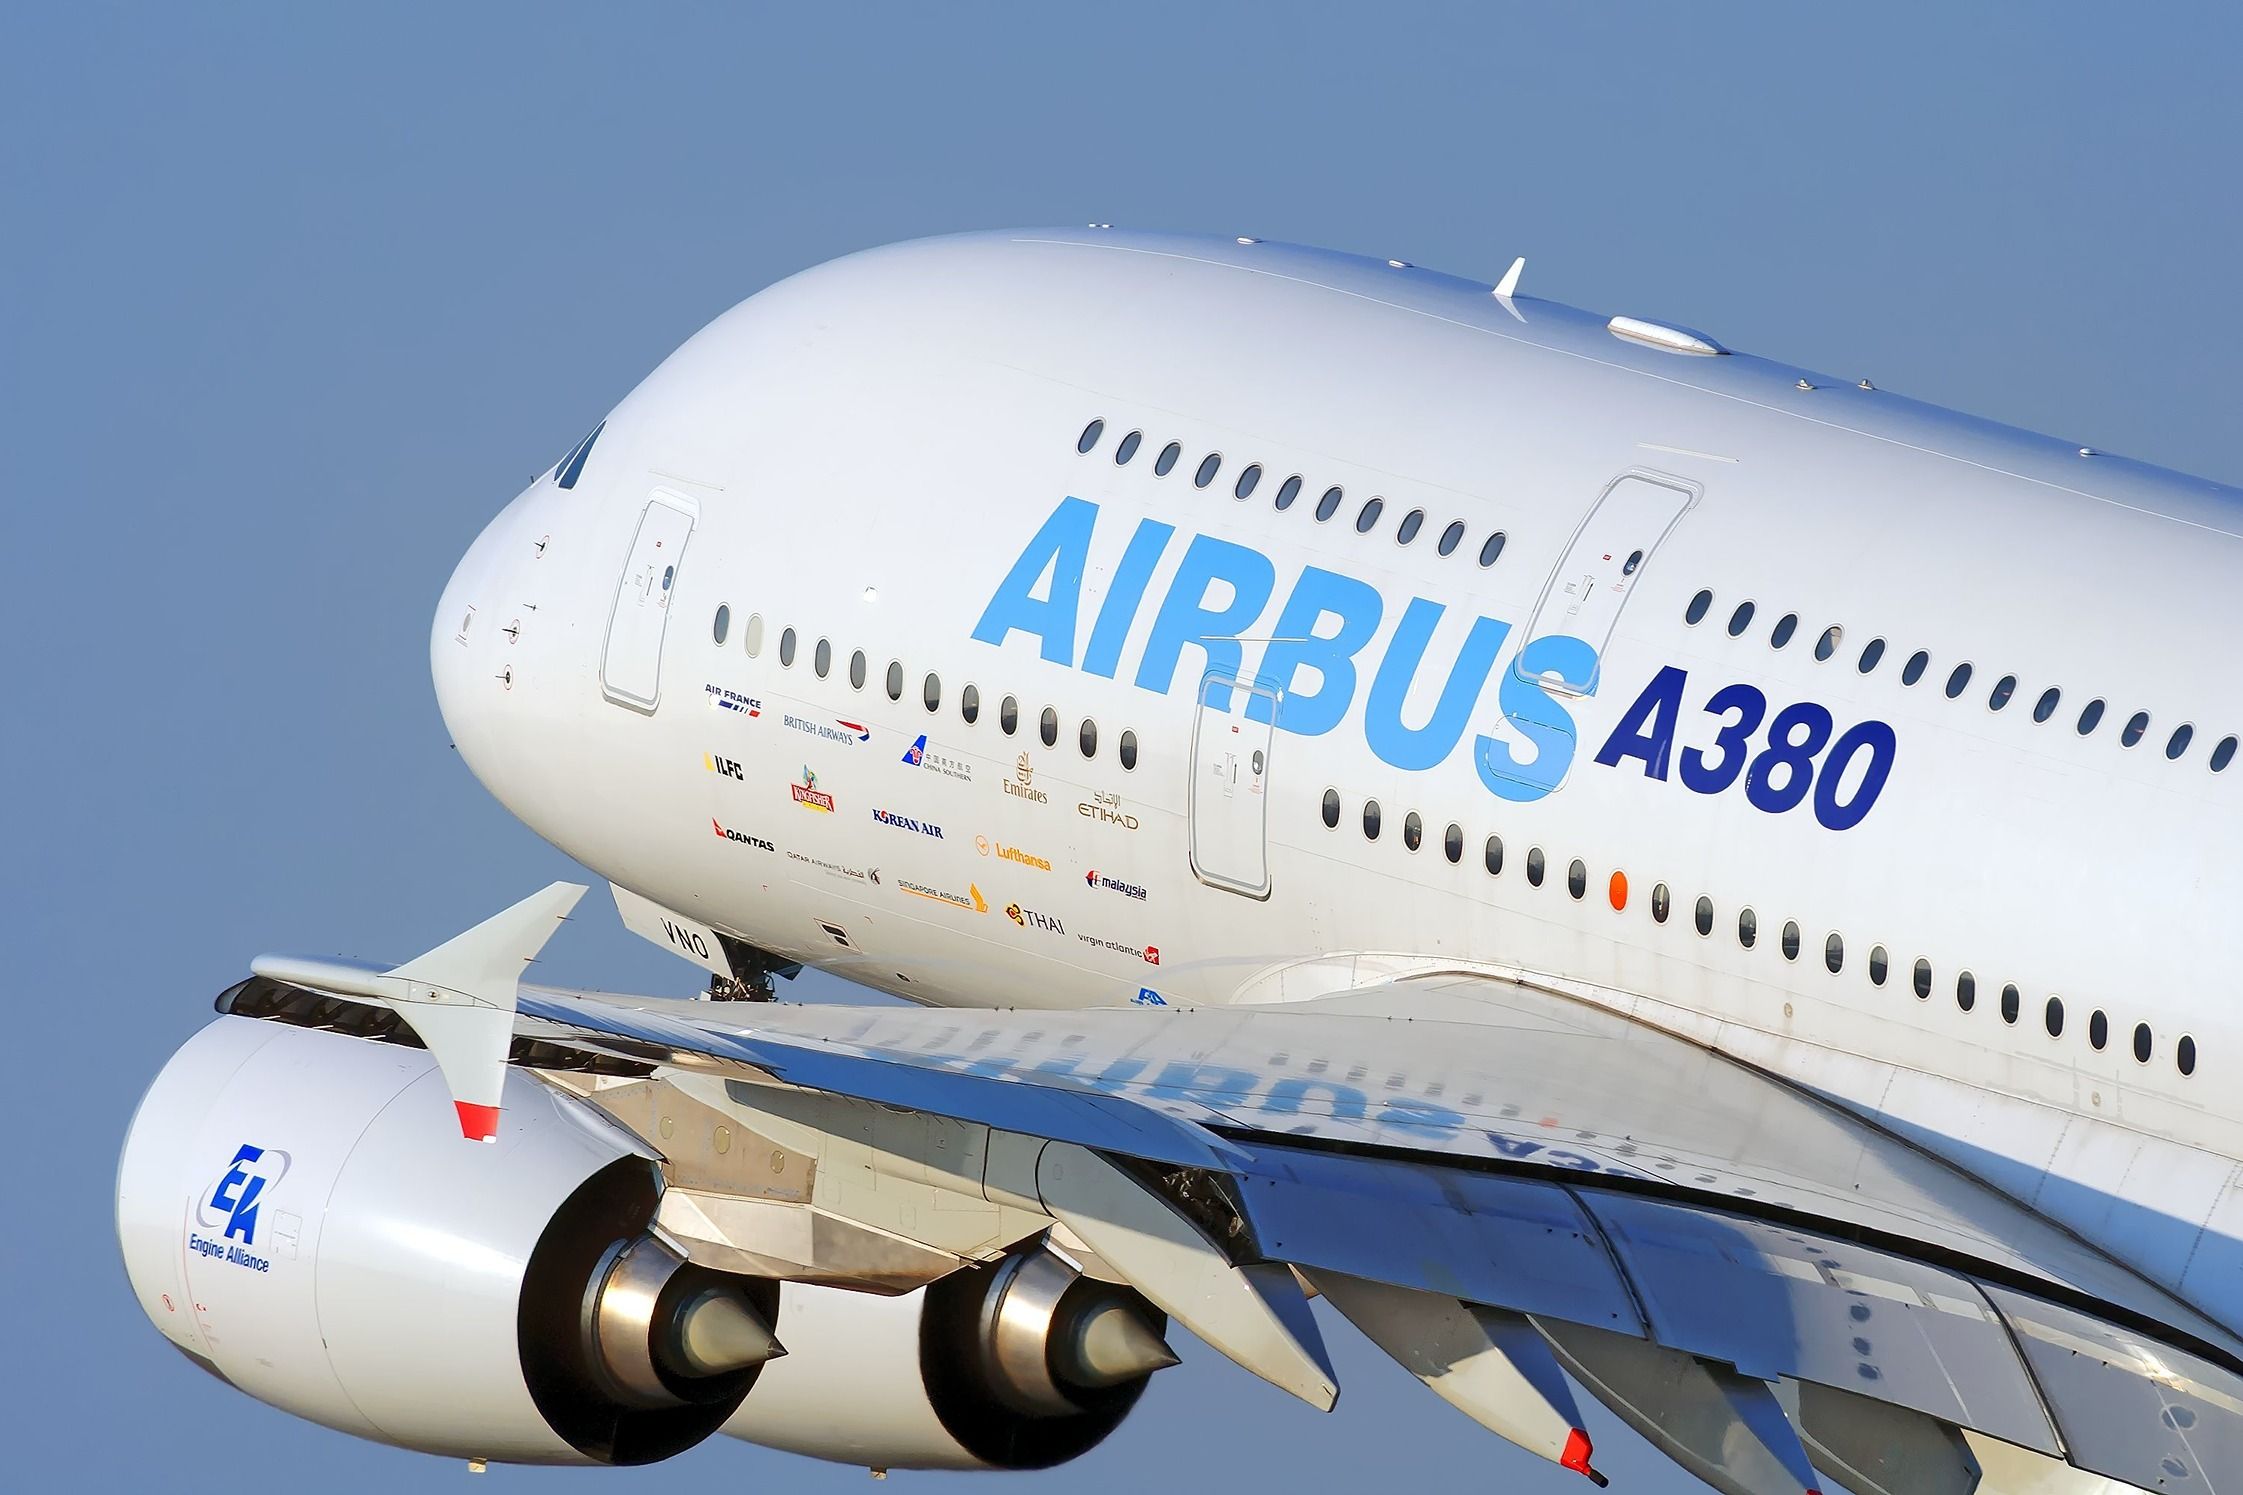 Airbus A380 in the manufacturers livery shutterstock_486304546